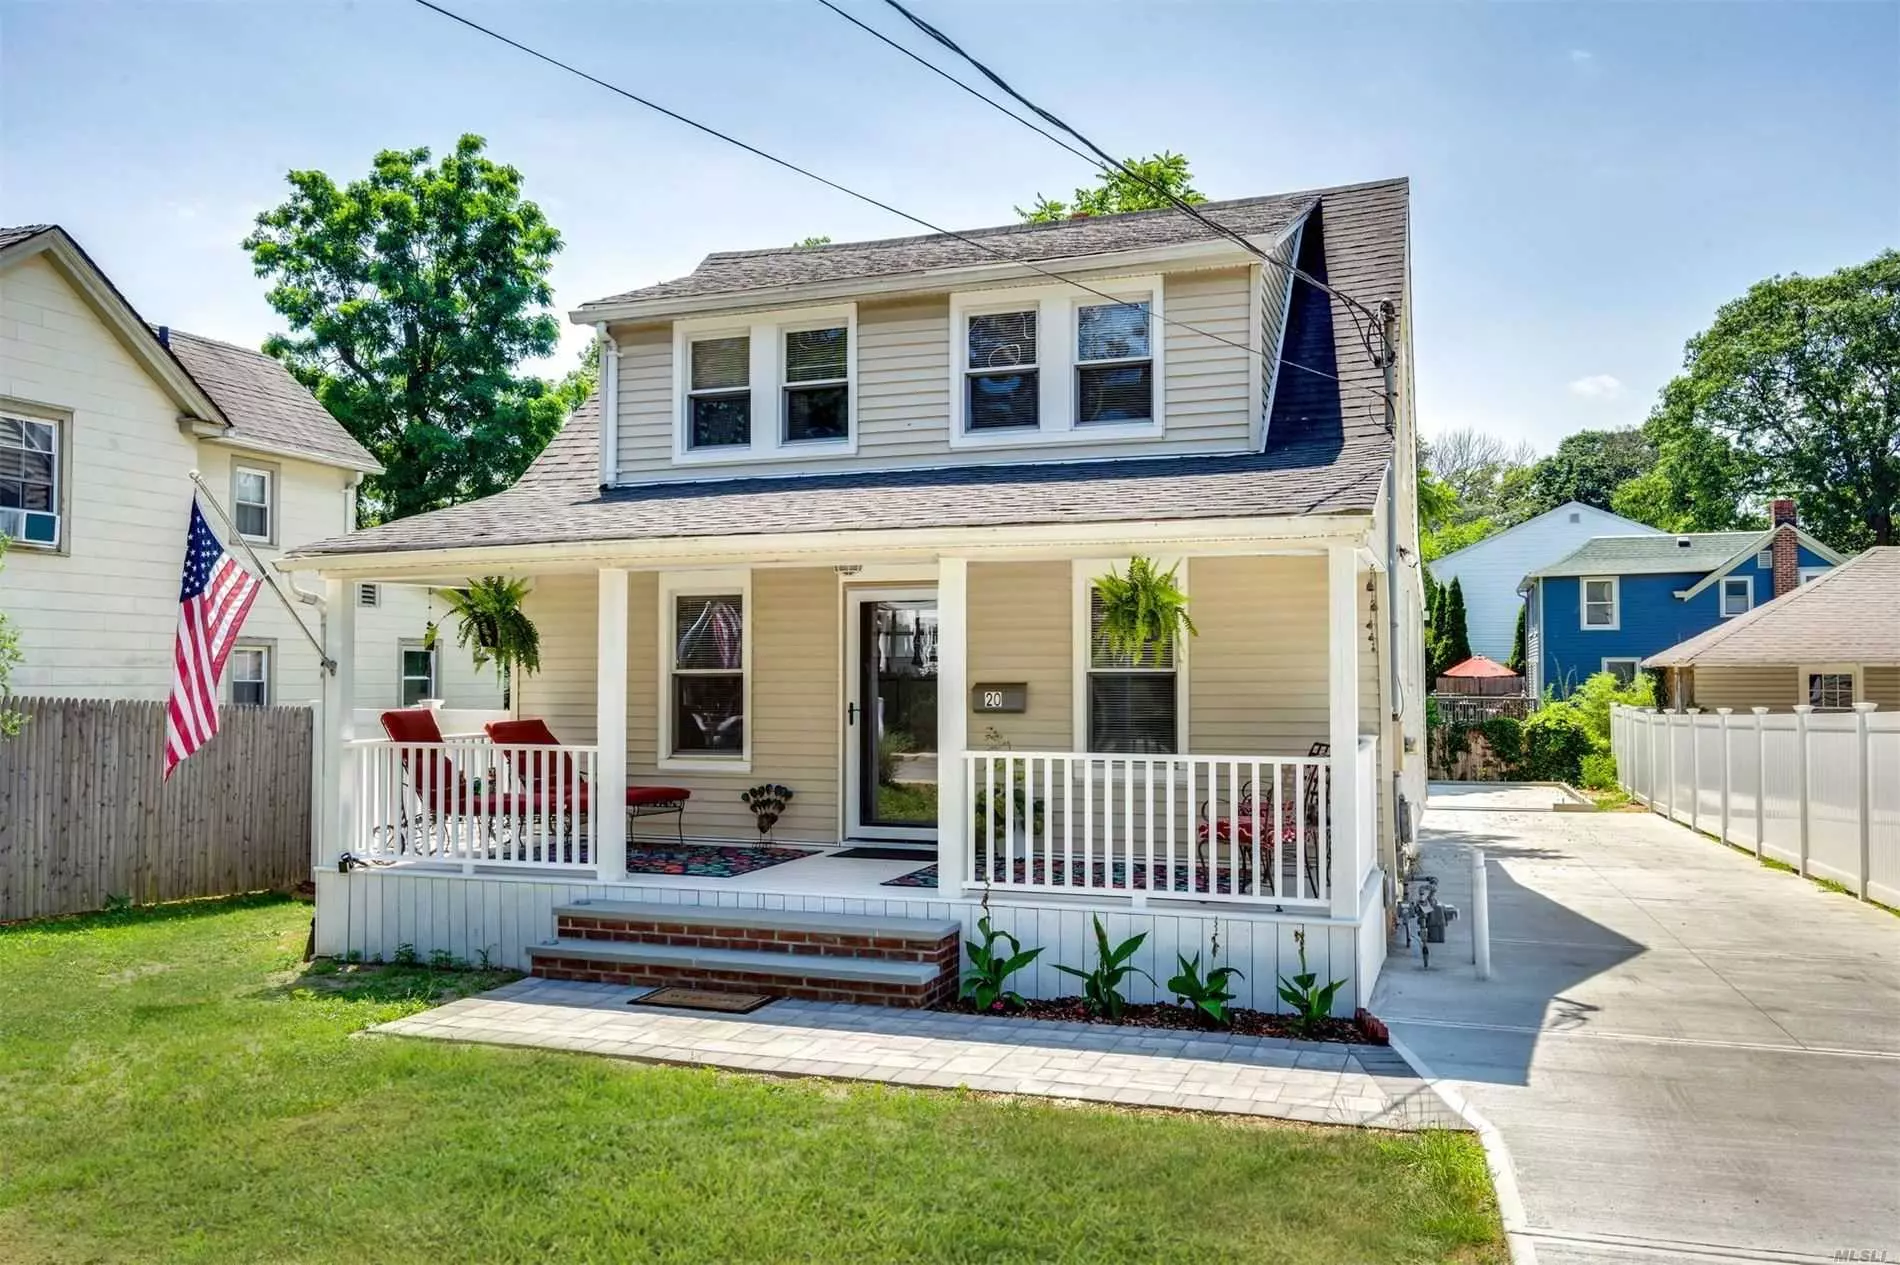 Move Right In and Enjoy Sun, Sand and the Salt Air in this secluded Seaside Beach Community! This 1920&rsquo;s Charmer has been Completely Updated Inside and Out w/Quality Finishes within the Past 2 Years. 1 Year Old Updates Include 4 Ductless AC, Installation of a Long Cement Paved Driveway, Rebuilt Covered Porch, Renovated Back Deck. Granite/Stainless Steel Kitchen, Completely Updated Baths and Wood Floors. A Gem!!! Beach rights to two nearby private beaches, Sound side and bay side. Wonderful Bayville Village amenities. Natural Gas is hooked up to the house.